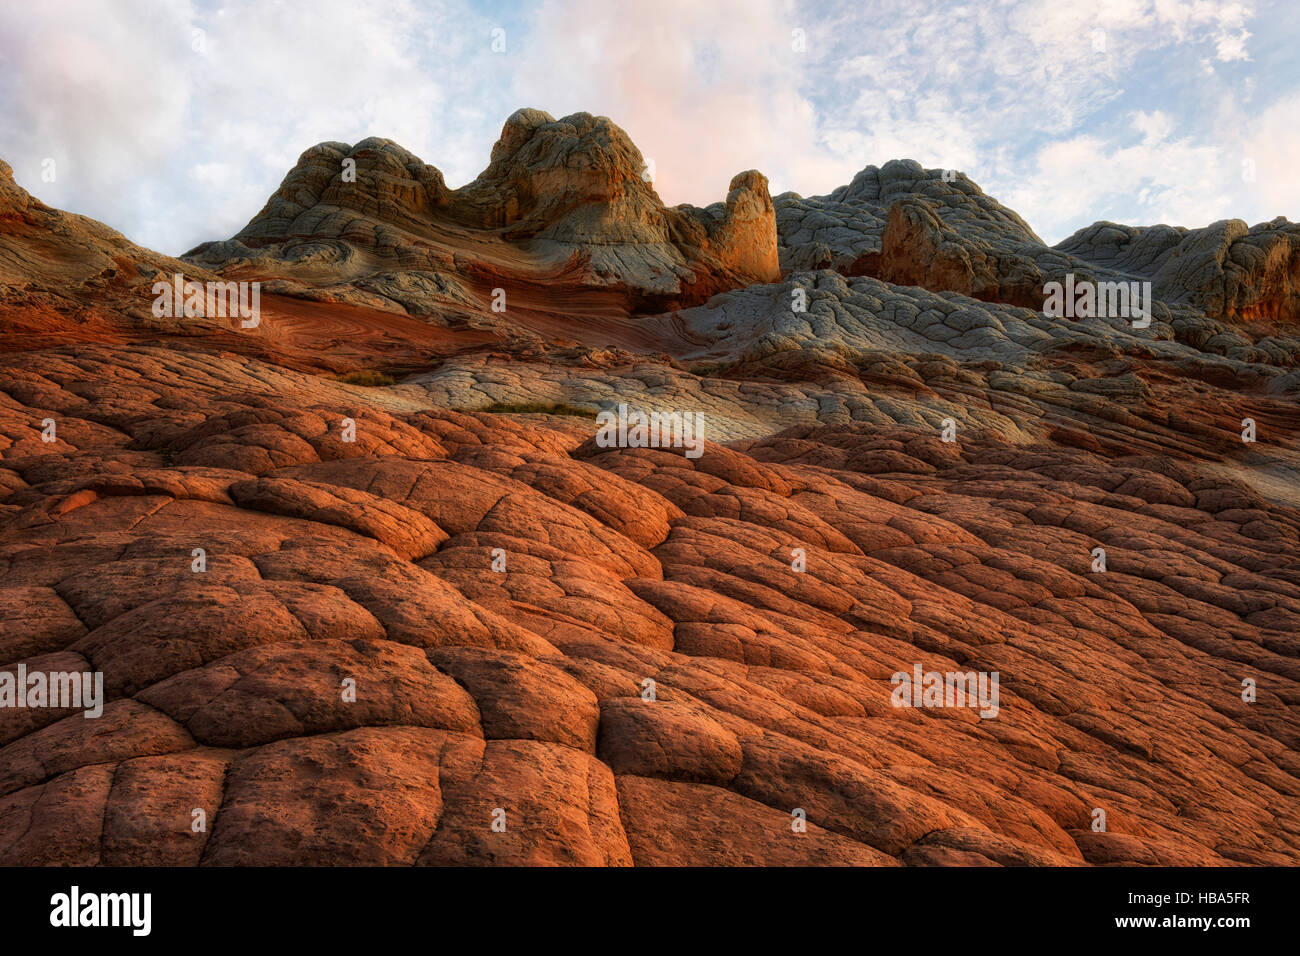 Sunset glow on the cross bedding brain rock and sandstone formations in Arizona's remote White Pocket  and Vermilion Cliffs National Monument. Stock Photo